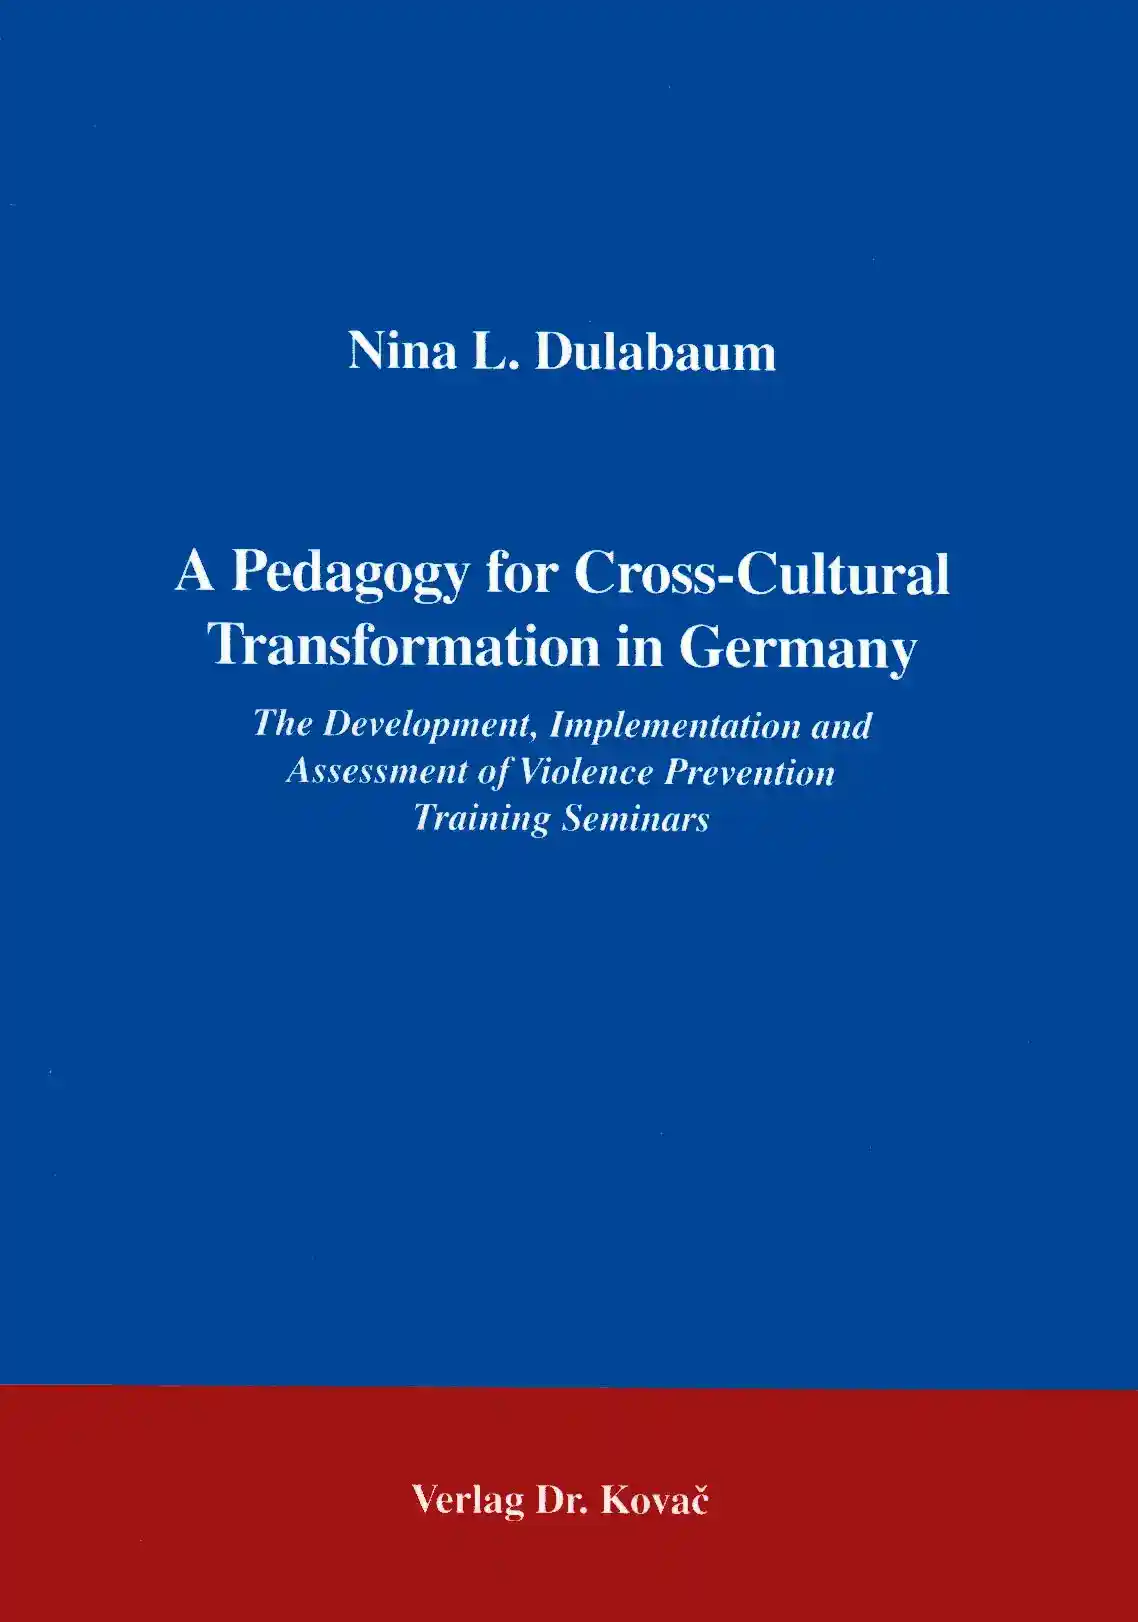 A Pedagogy for Cross-Cultural Transformation in Germany (Forschungsarbeit)